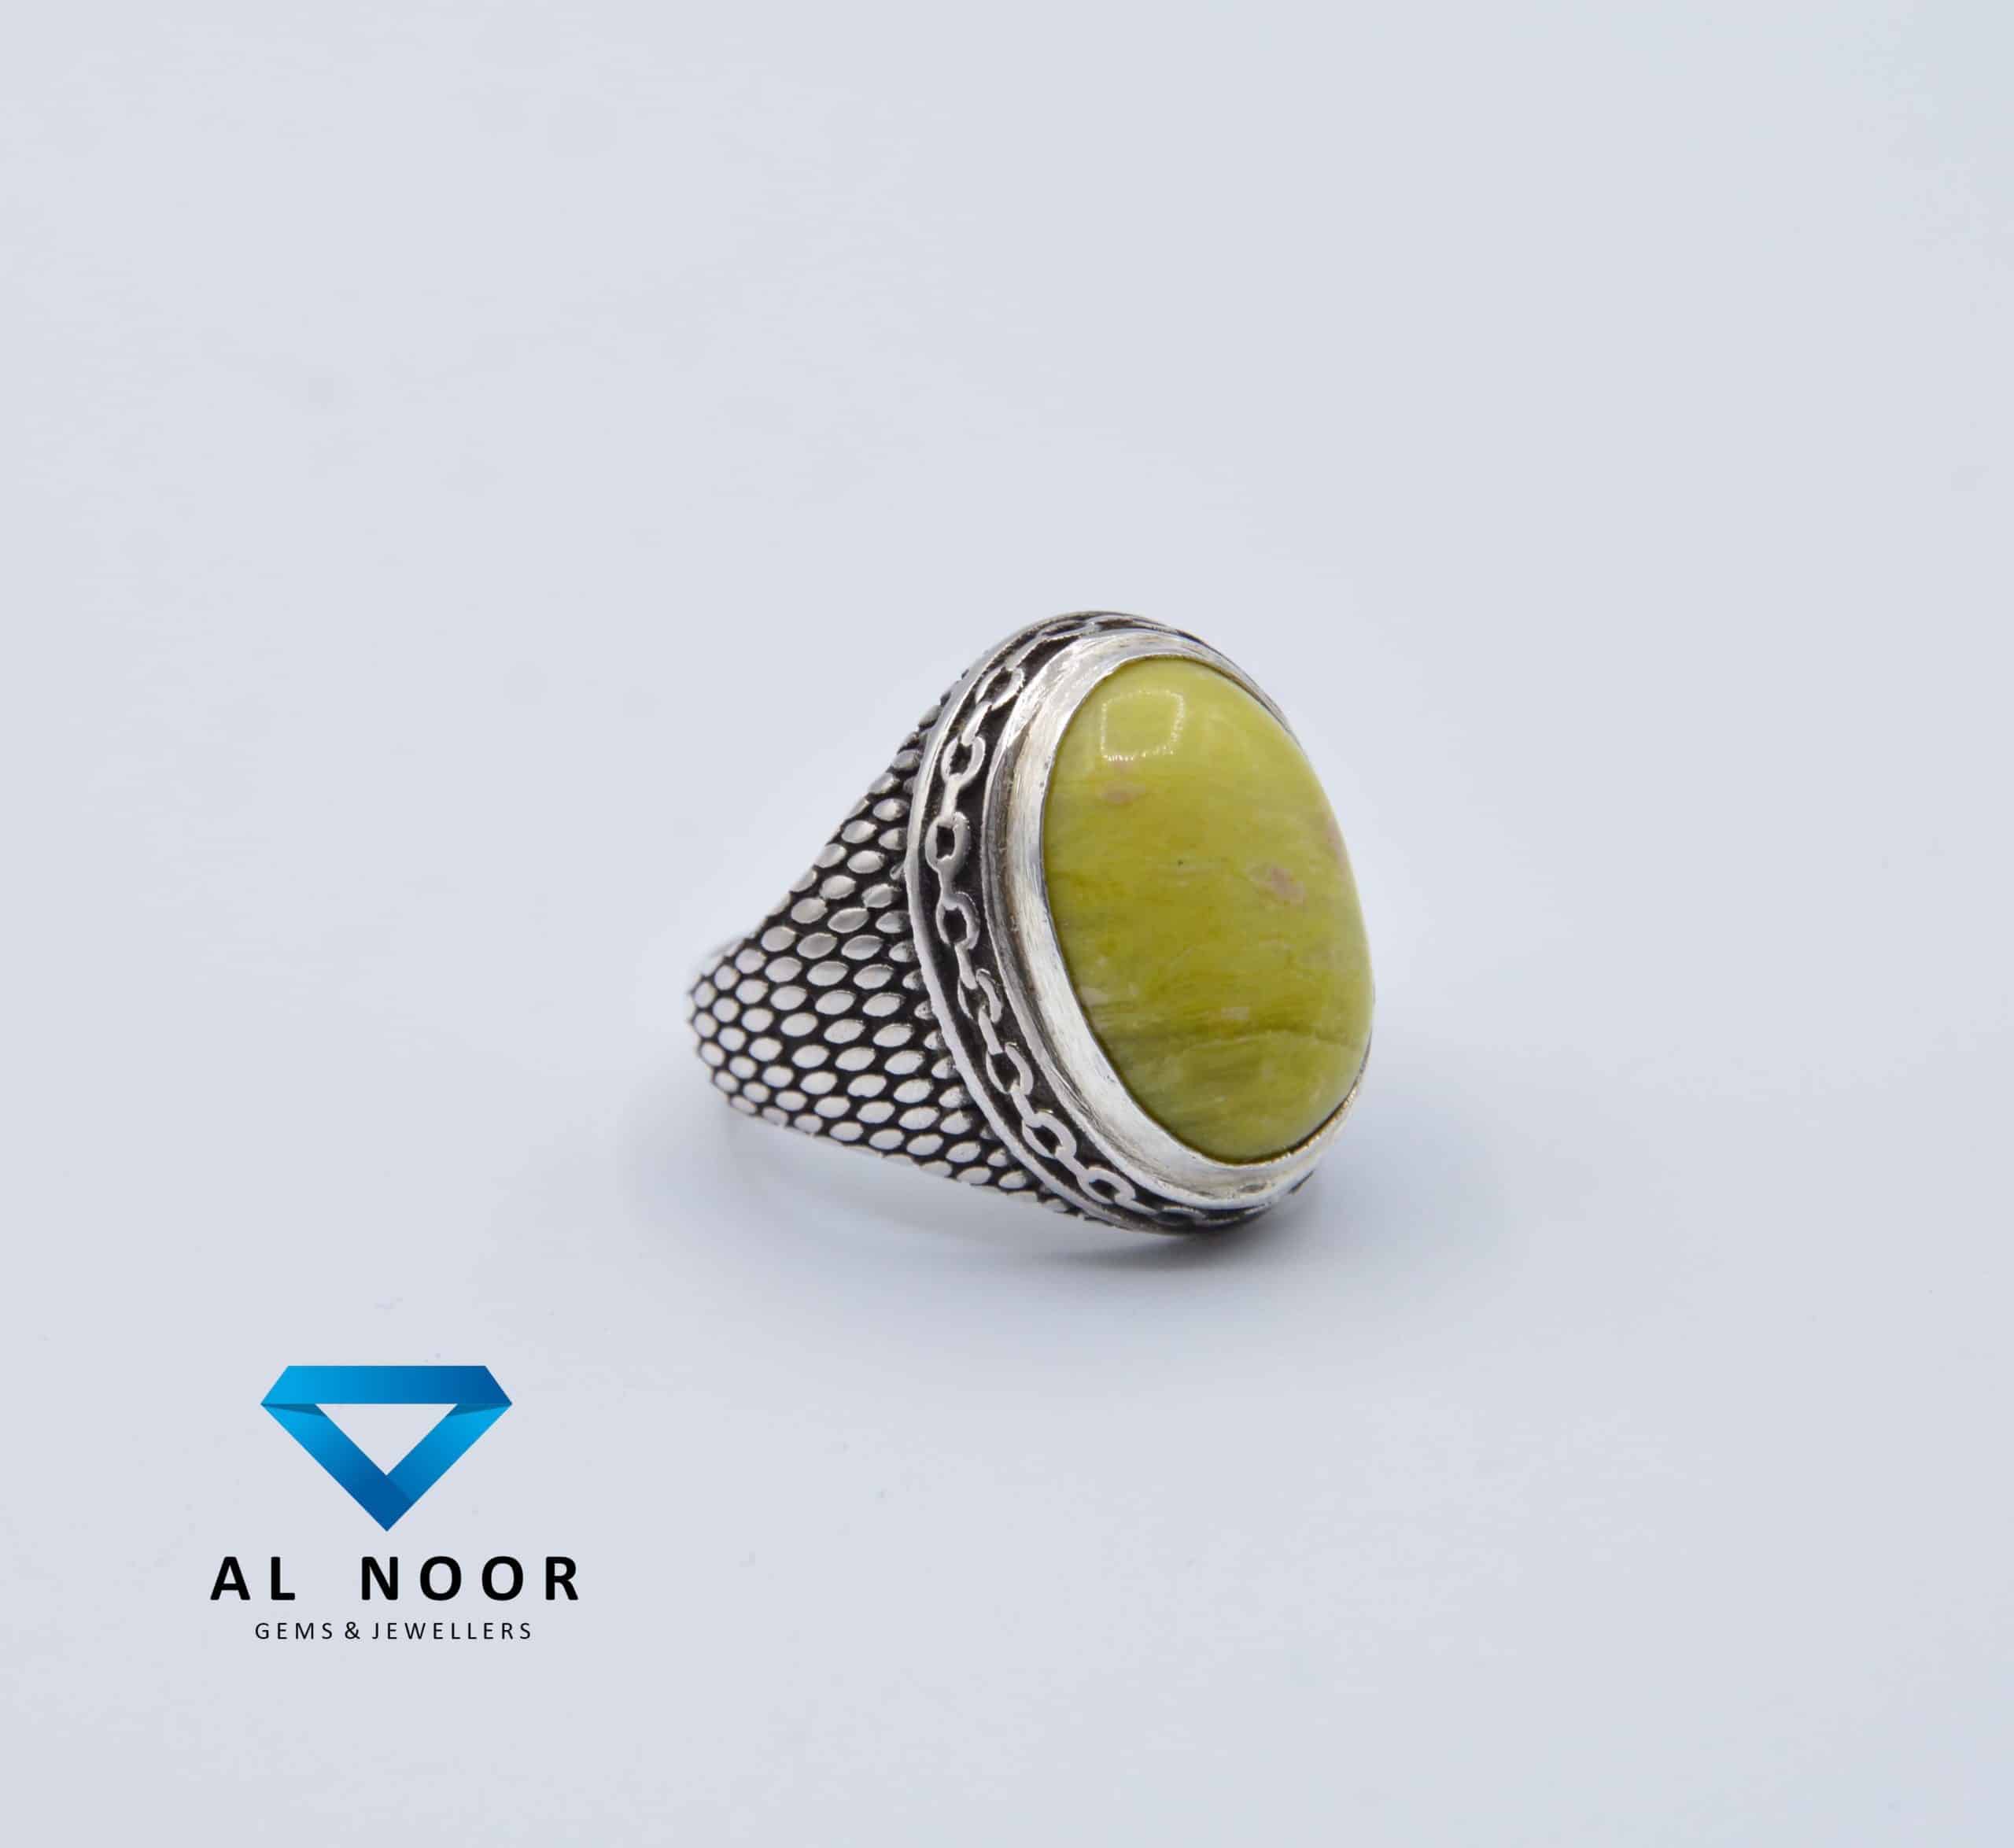 Hand Made Ring with Natural Serpentine - Al Noor Gems & Jewellers